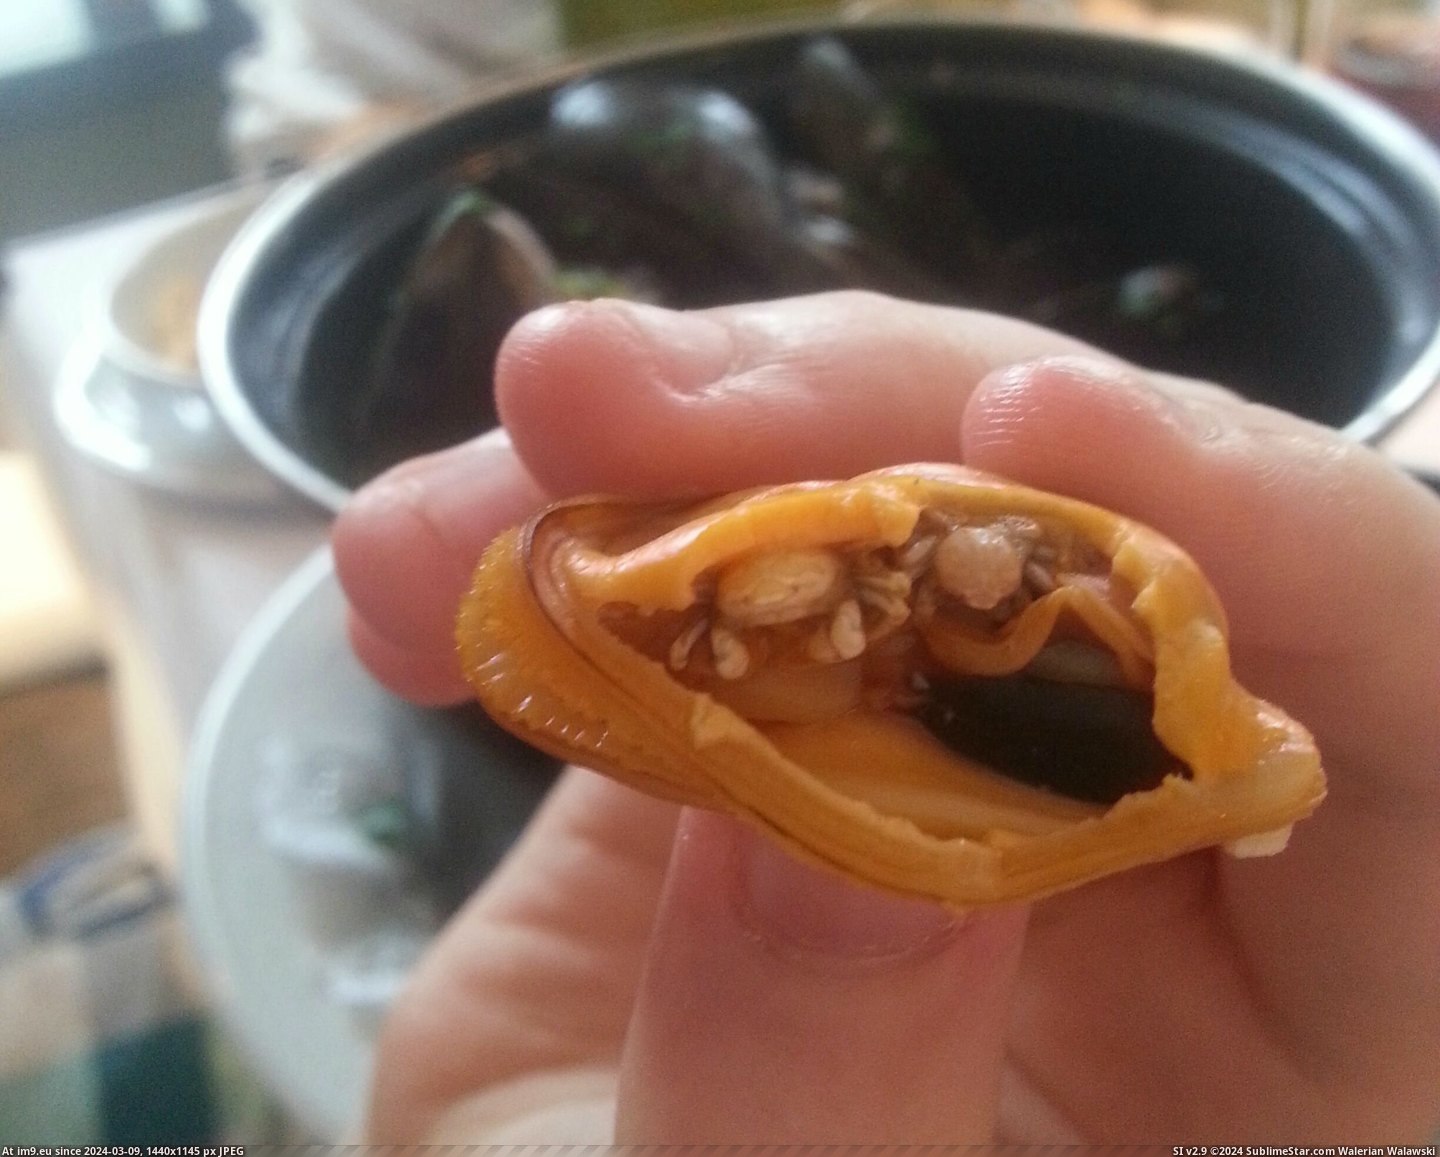 #Wtf #Two #Crabs #Mussel #Tiny #Eat [Wtf] Found two tiny crabs in the mussel I was about to eat Pic. (Bild von album My r/WTF favs))